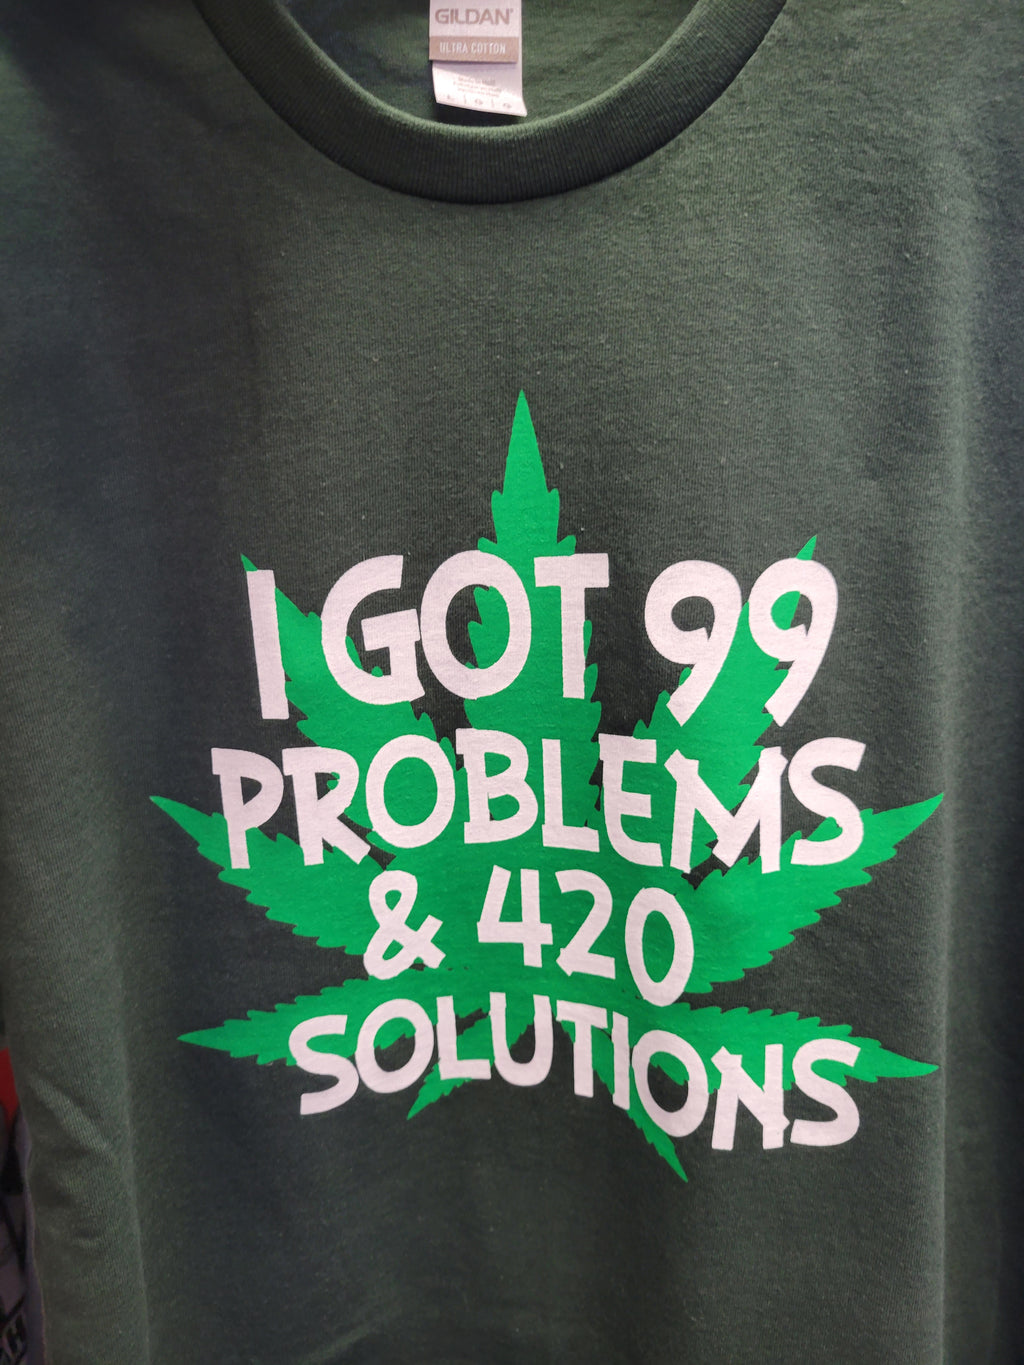 420 solutions